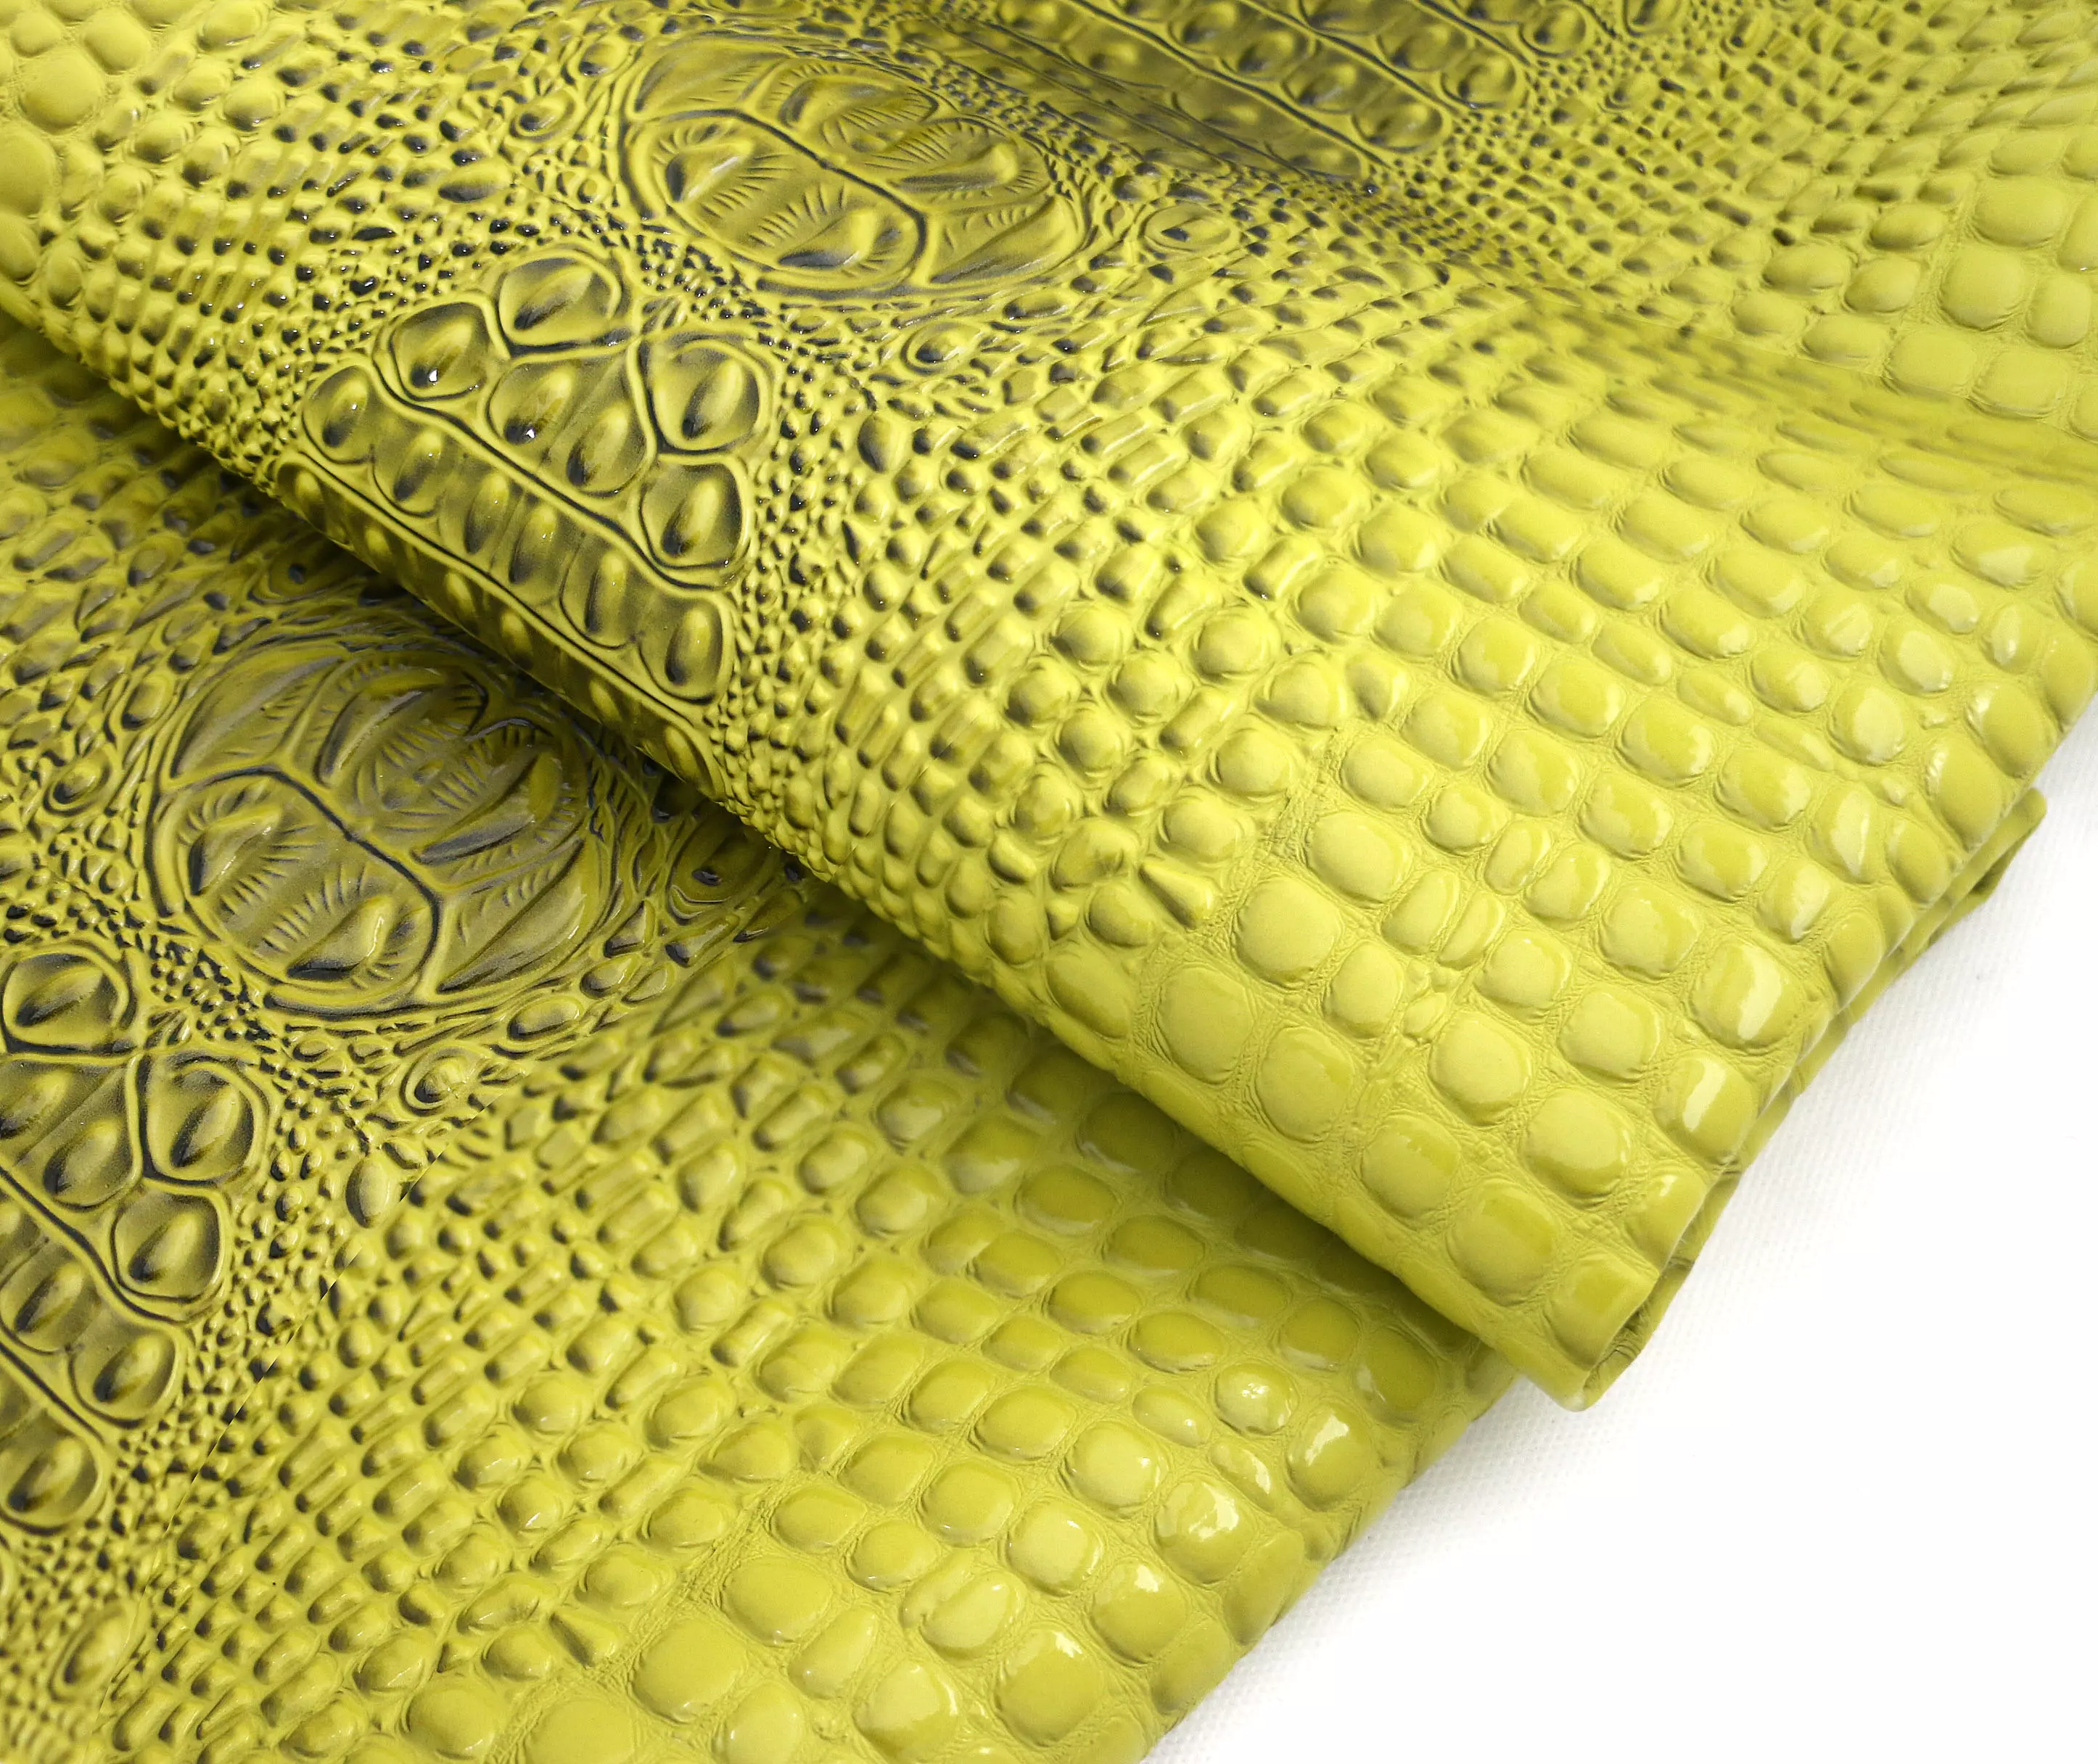 Upholstery Synthetic Leather Fabric, Faux Leather Sheets Fabric, Crocodile  Pattern Leather Fabric, Upholstered Decorative Leather With Pearly Shiny